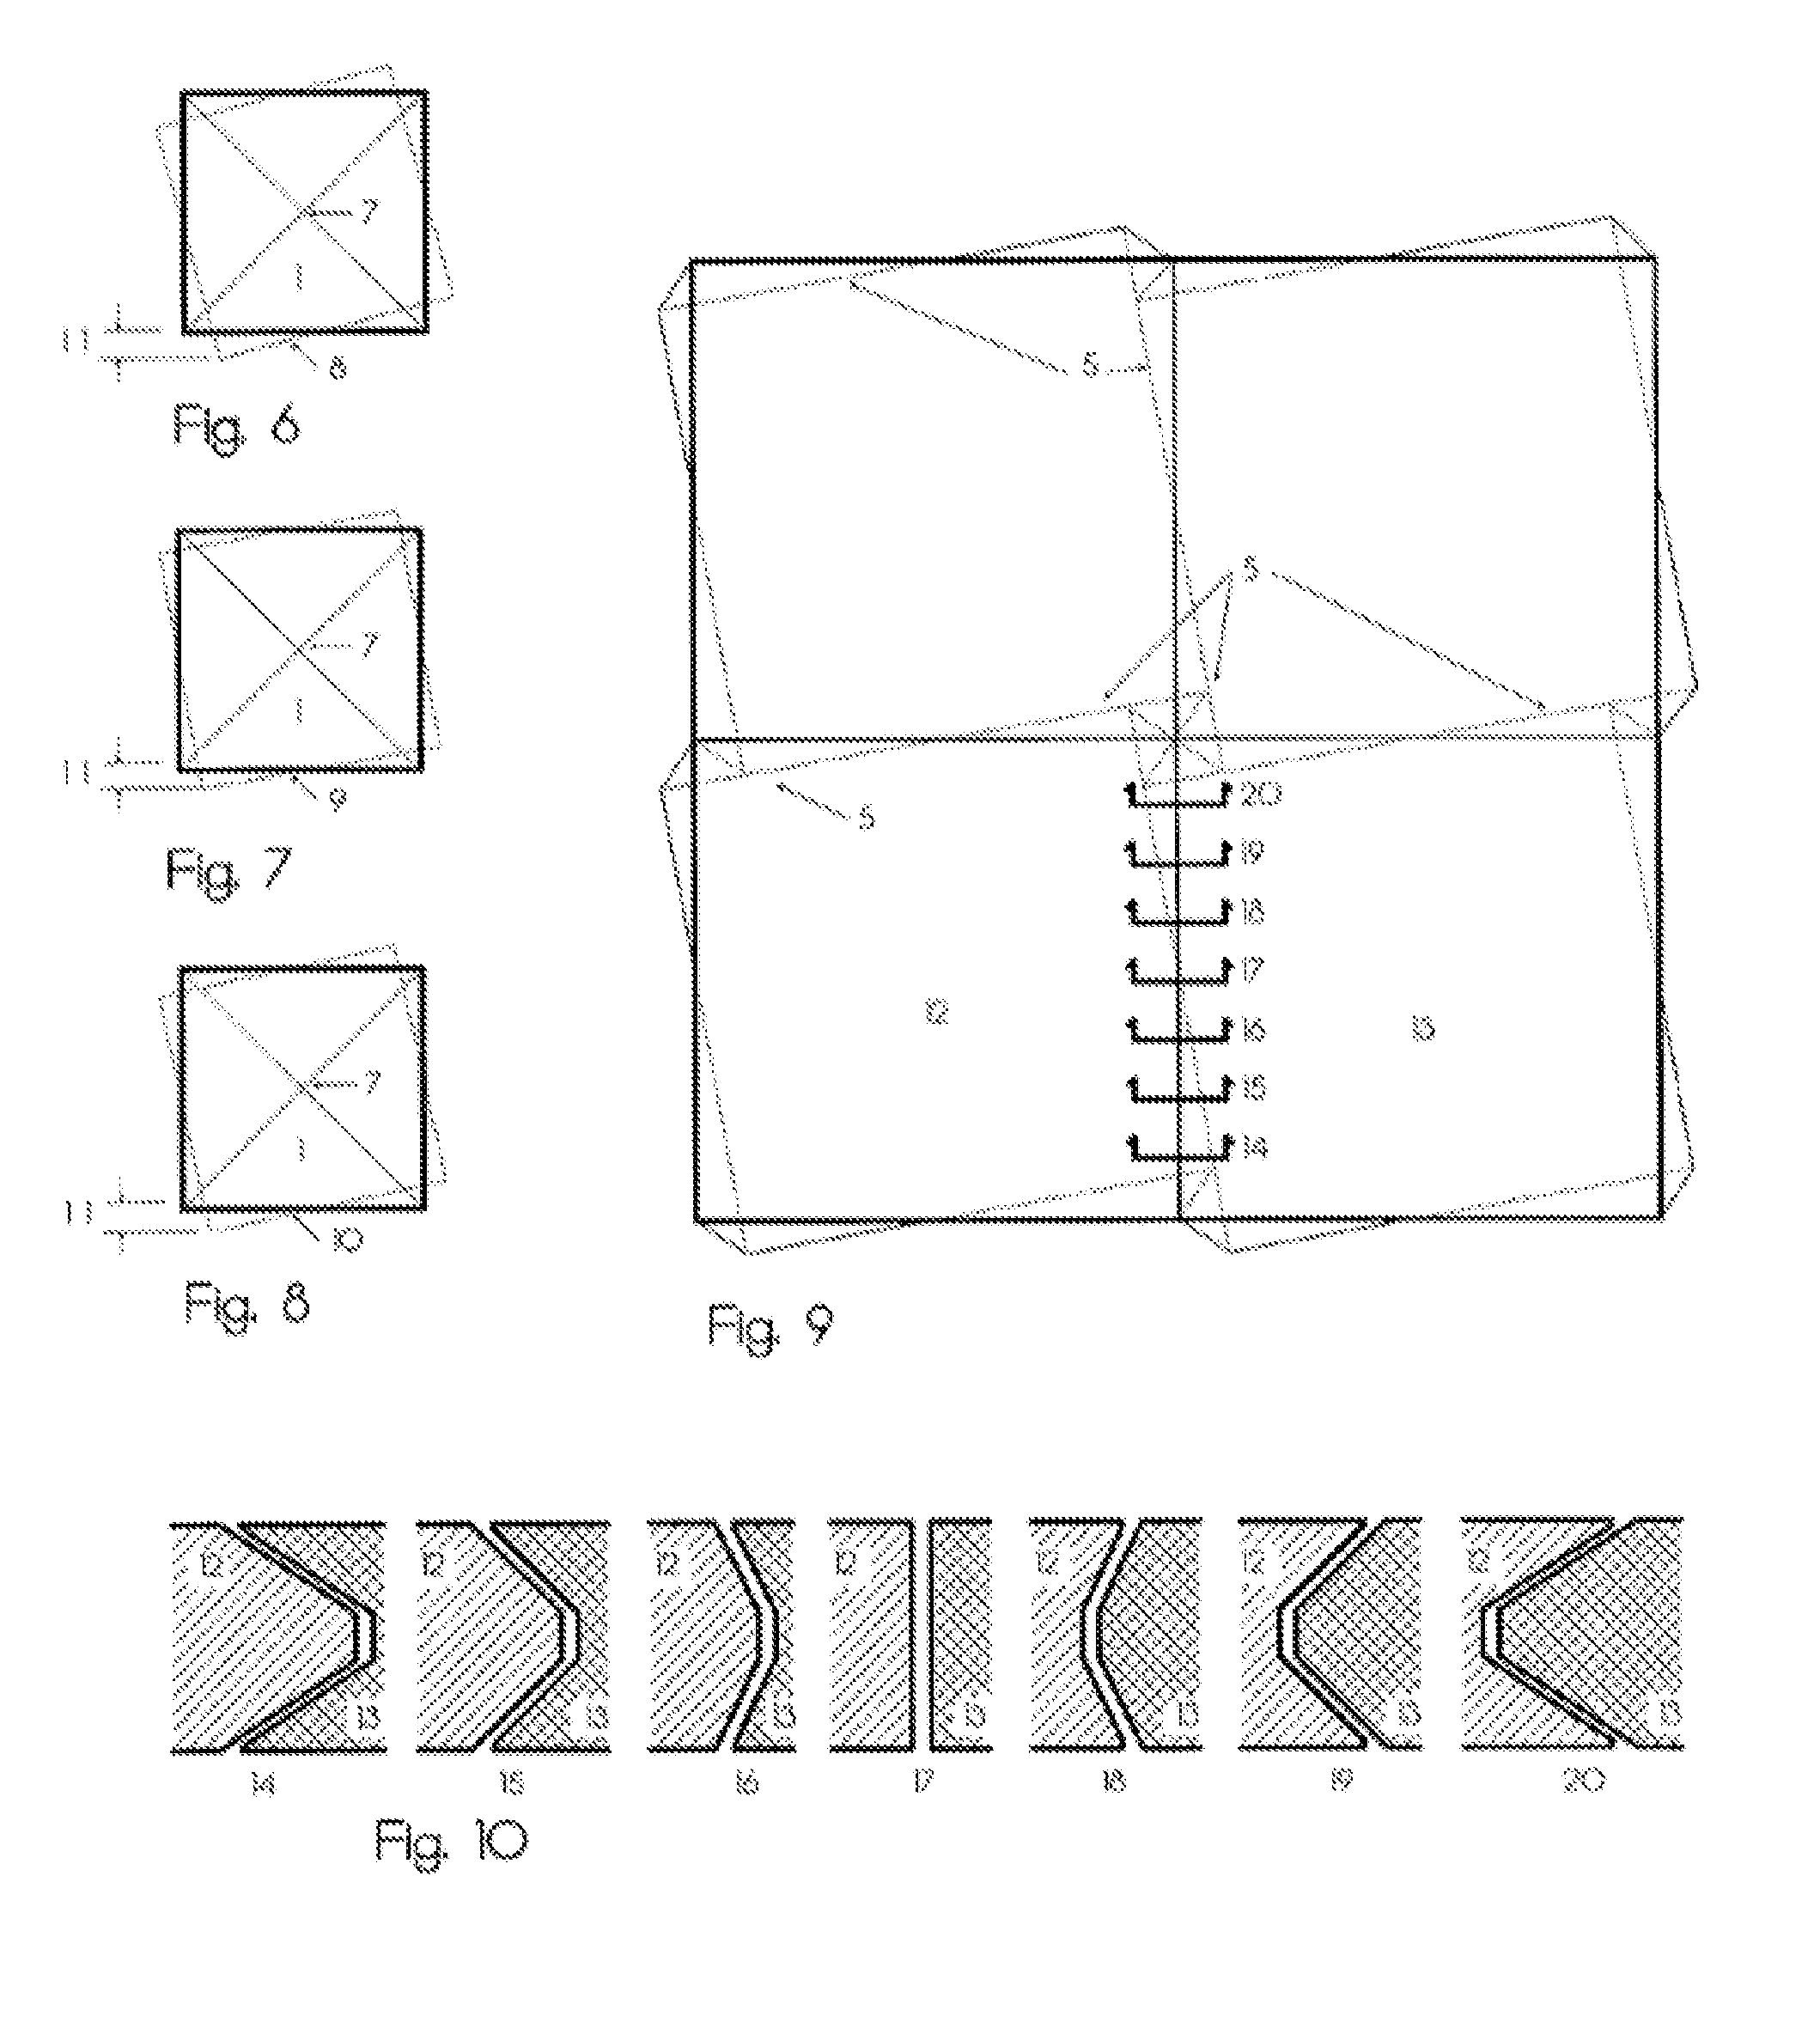 Interlocking construction systems and methods